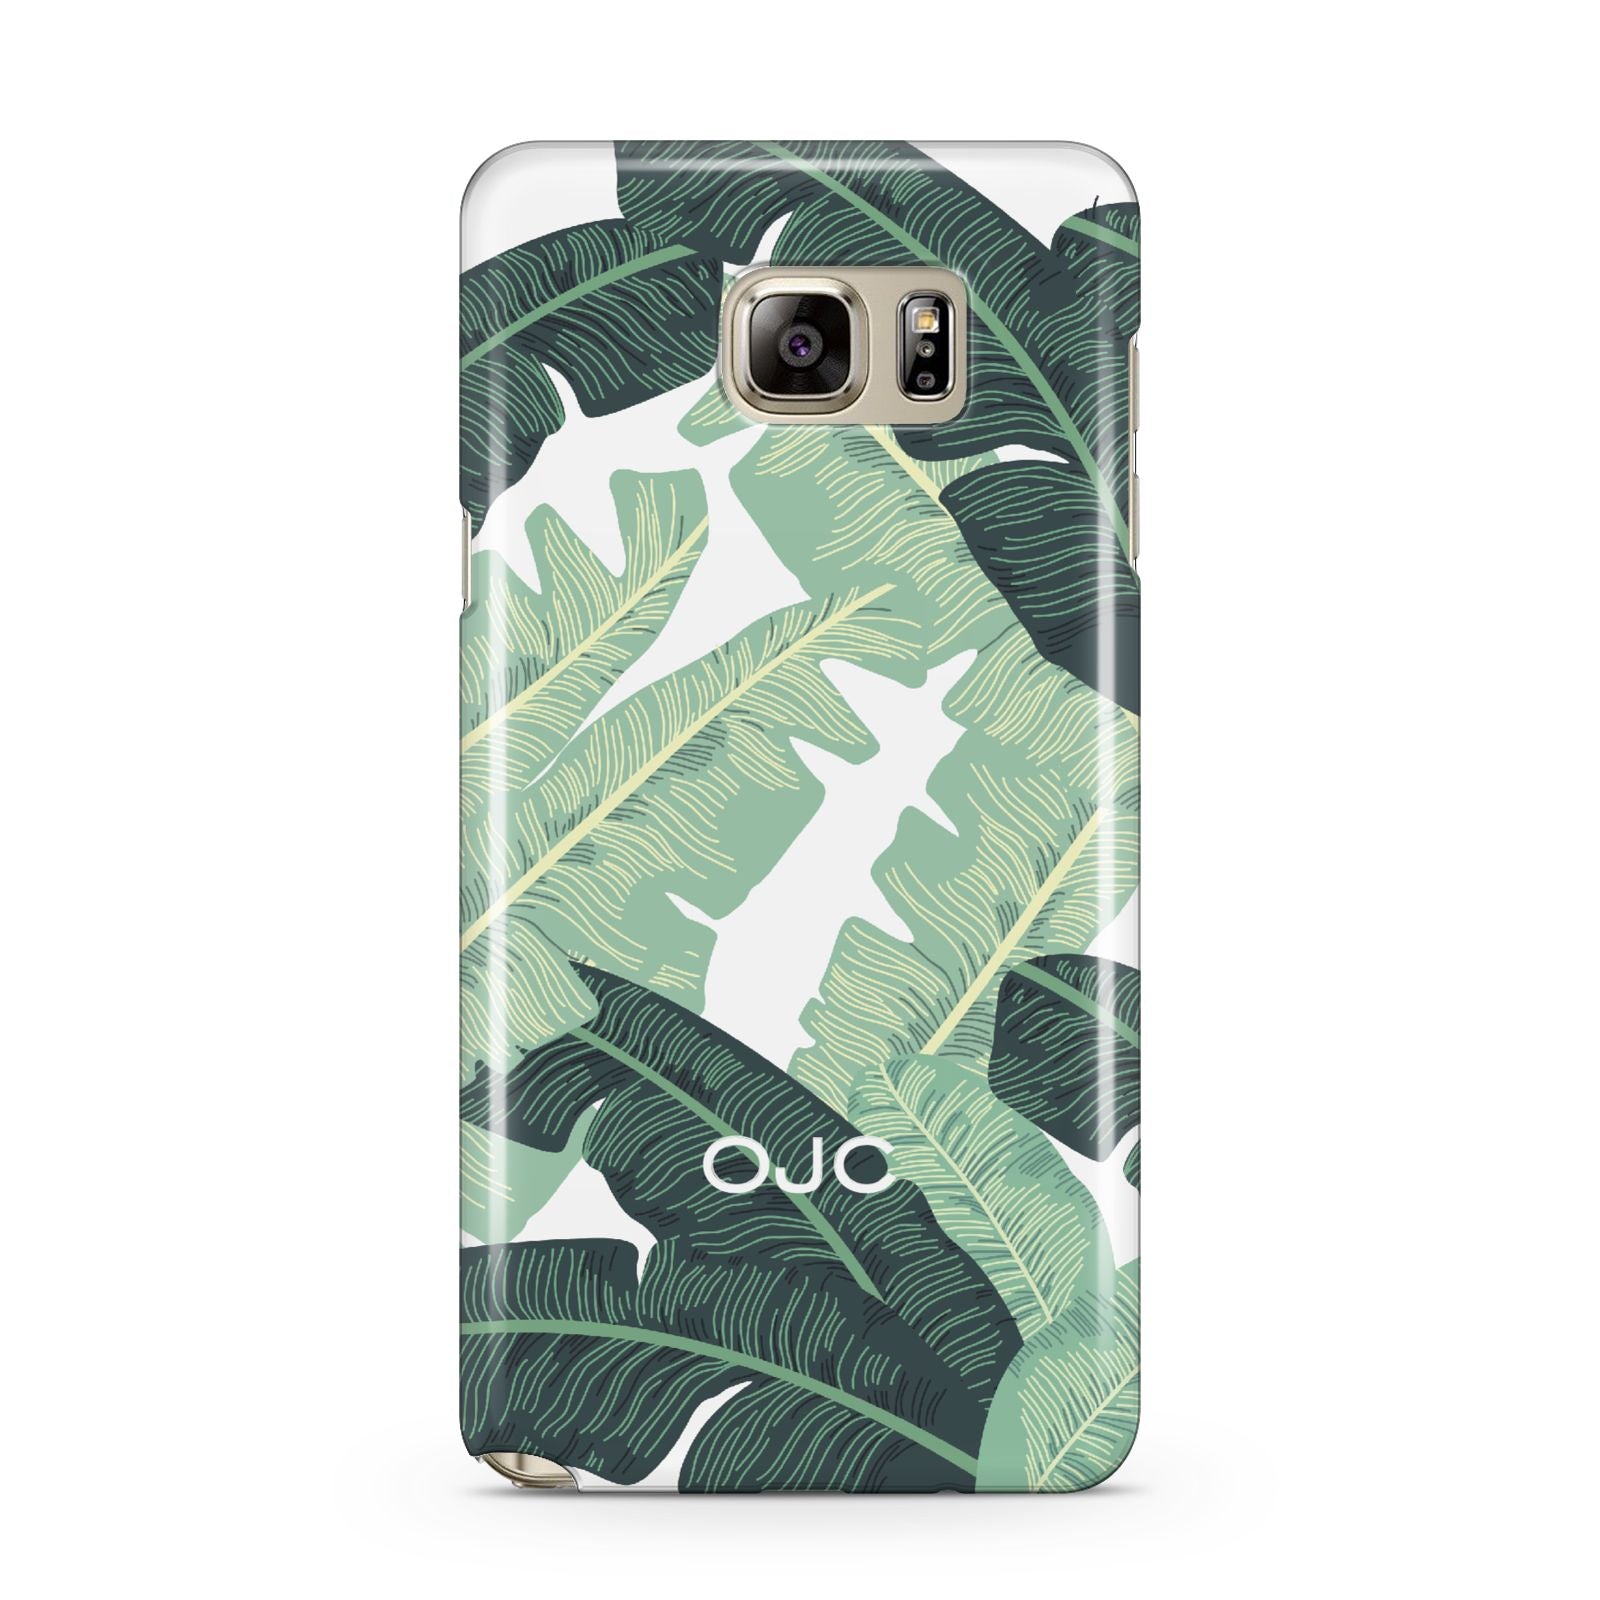 Personalised Palm Banana Leaf Samsung Galaxy Note 5 Case